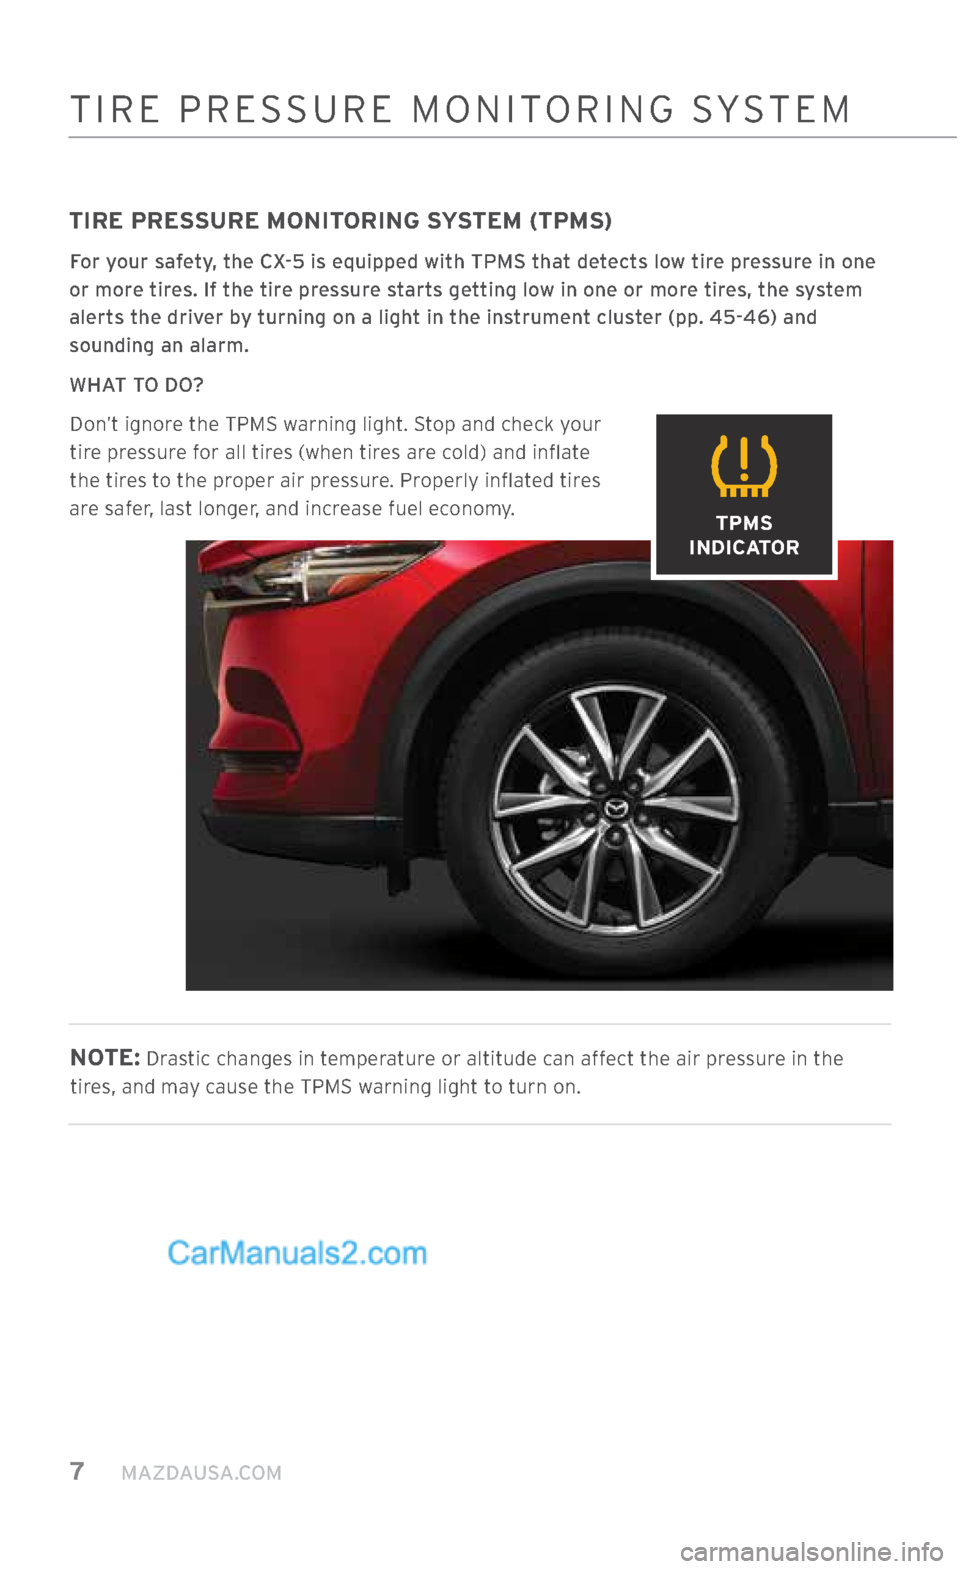 MAZDA MODEL CX-5 2017  Smart Start Guide (in English) 7     MAZDAUSA.COM
TIRE PRESSURE MONITORING SYSTEM (TPMS)
For your safety, the CX-5 is equipped with TPMS that detects low tire pressure in one 
or more tires. If the tire pressure starts getting low 